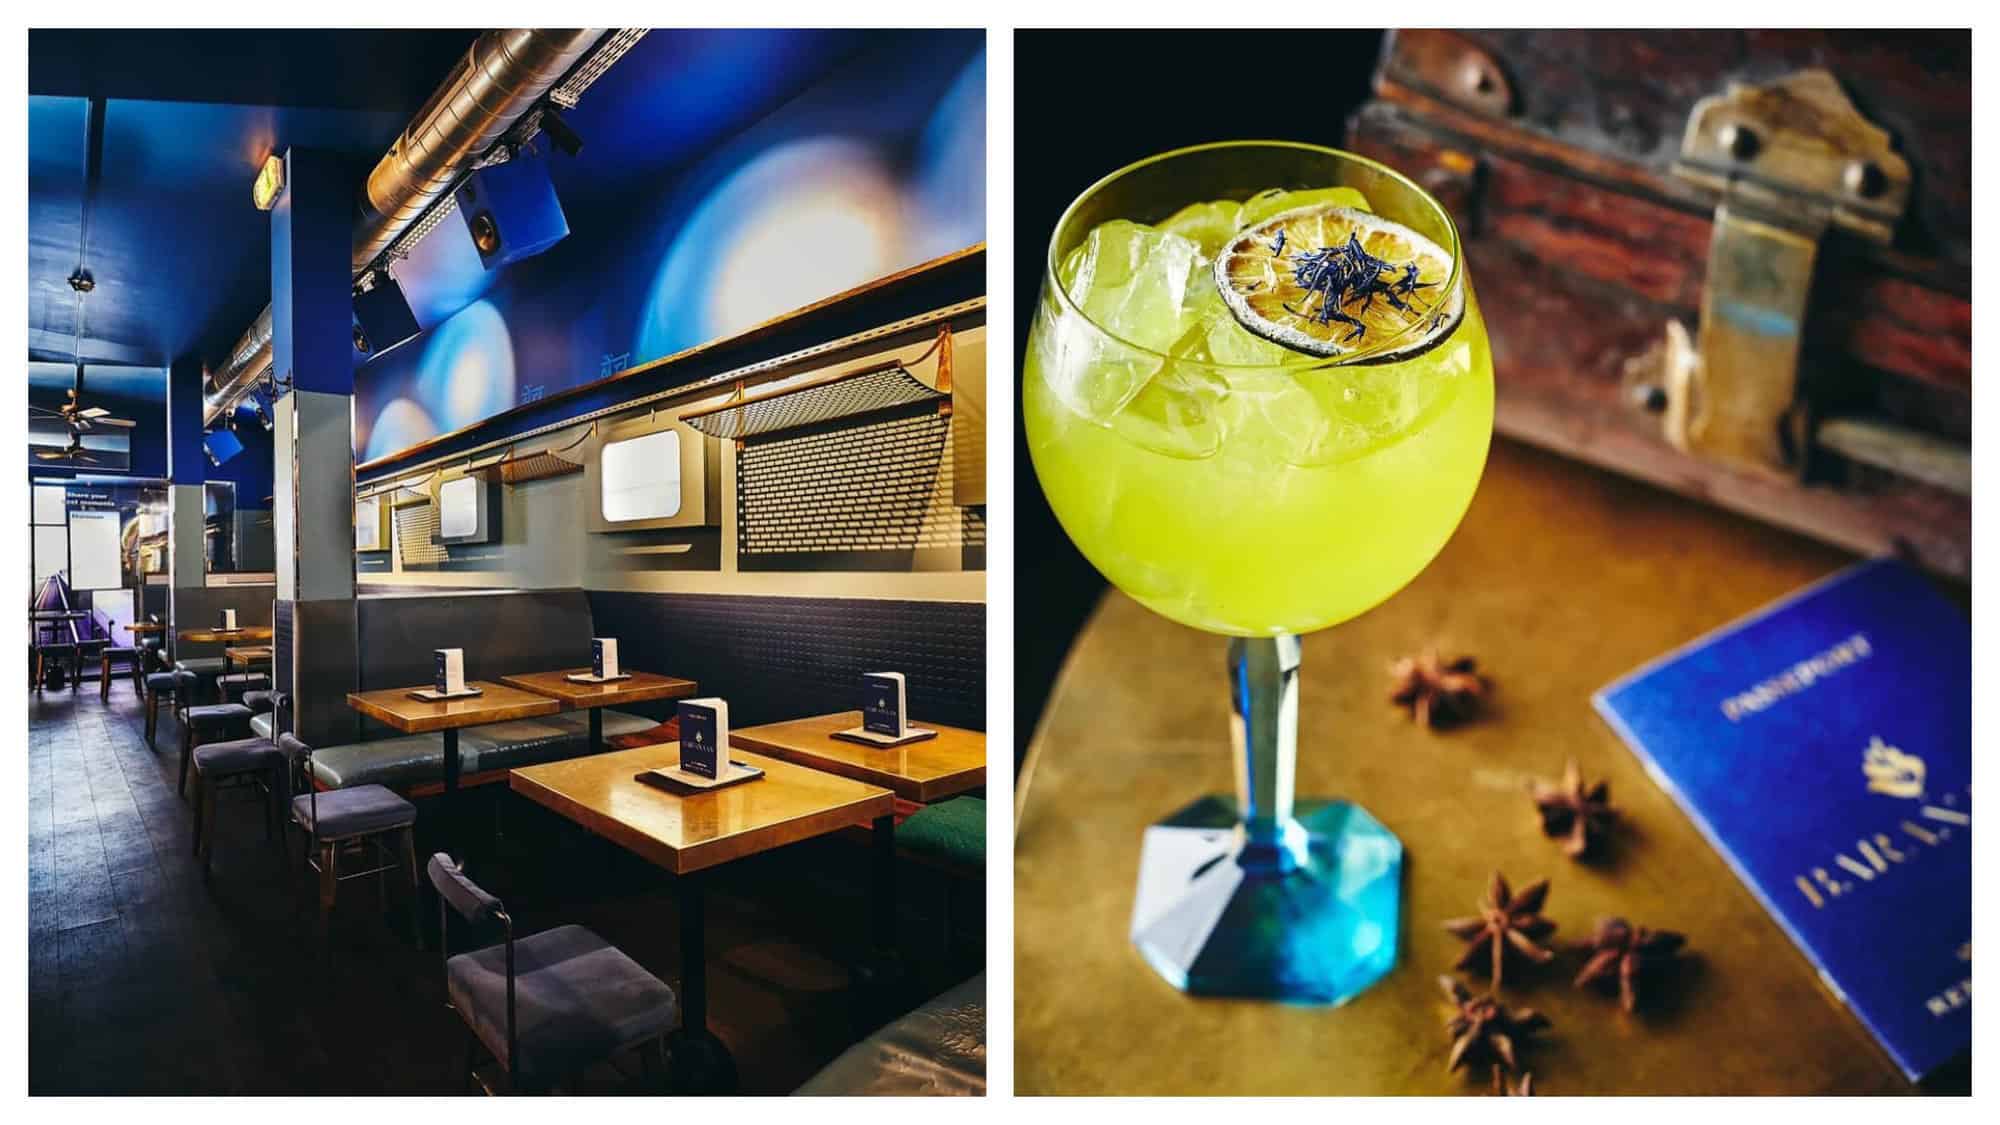 Left: the interior of a bar in Paris called "Baranaan." There are several tables and chairs and the walls are painted bright blue. Right: a bright yellow drink from "Baranaan." A small blue passport can be seen in the right corner of the image.